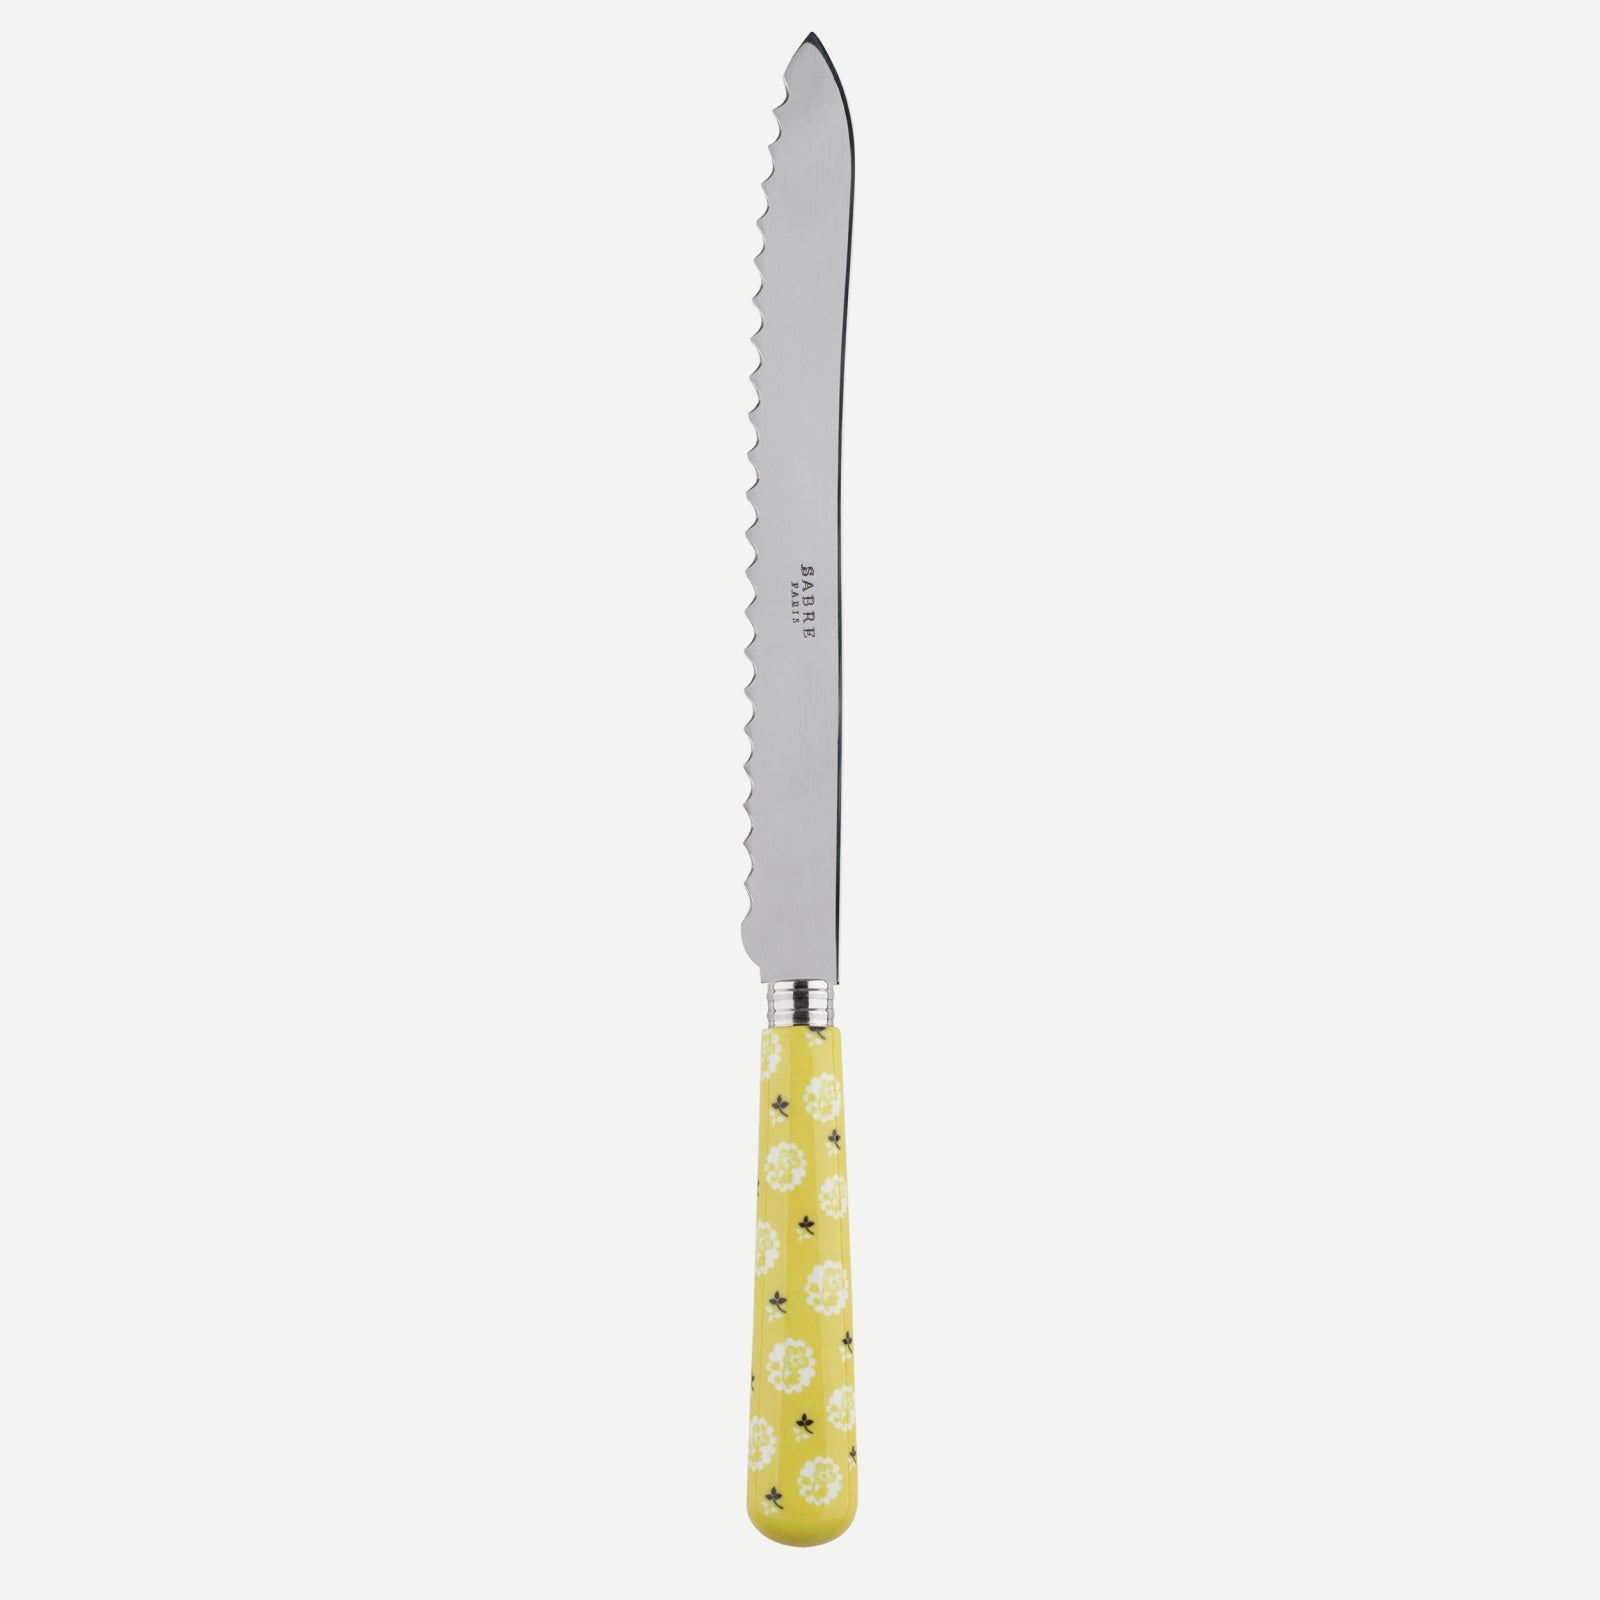 Bread knife - Provencal - Yellow